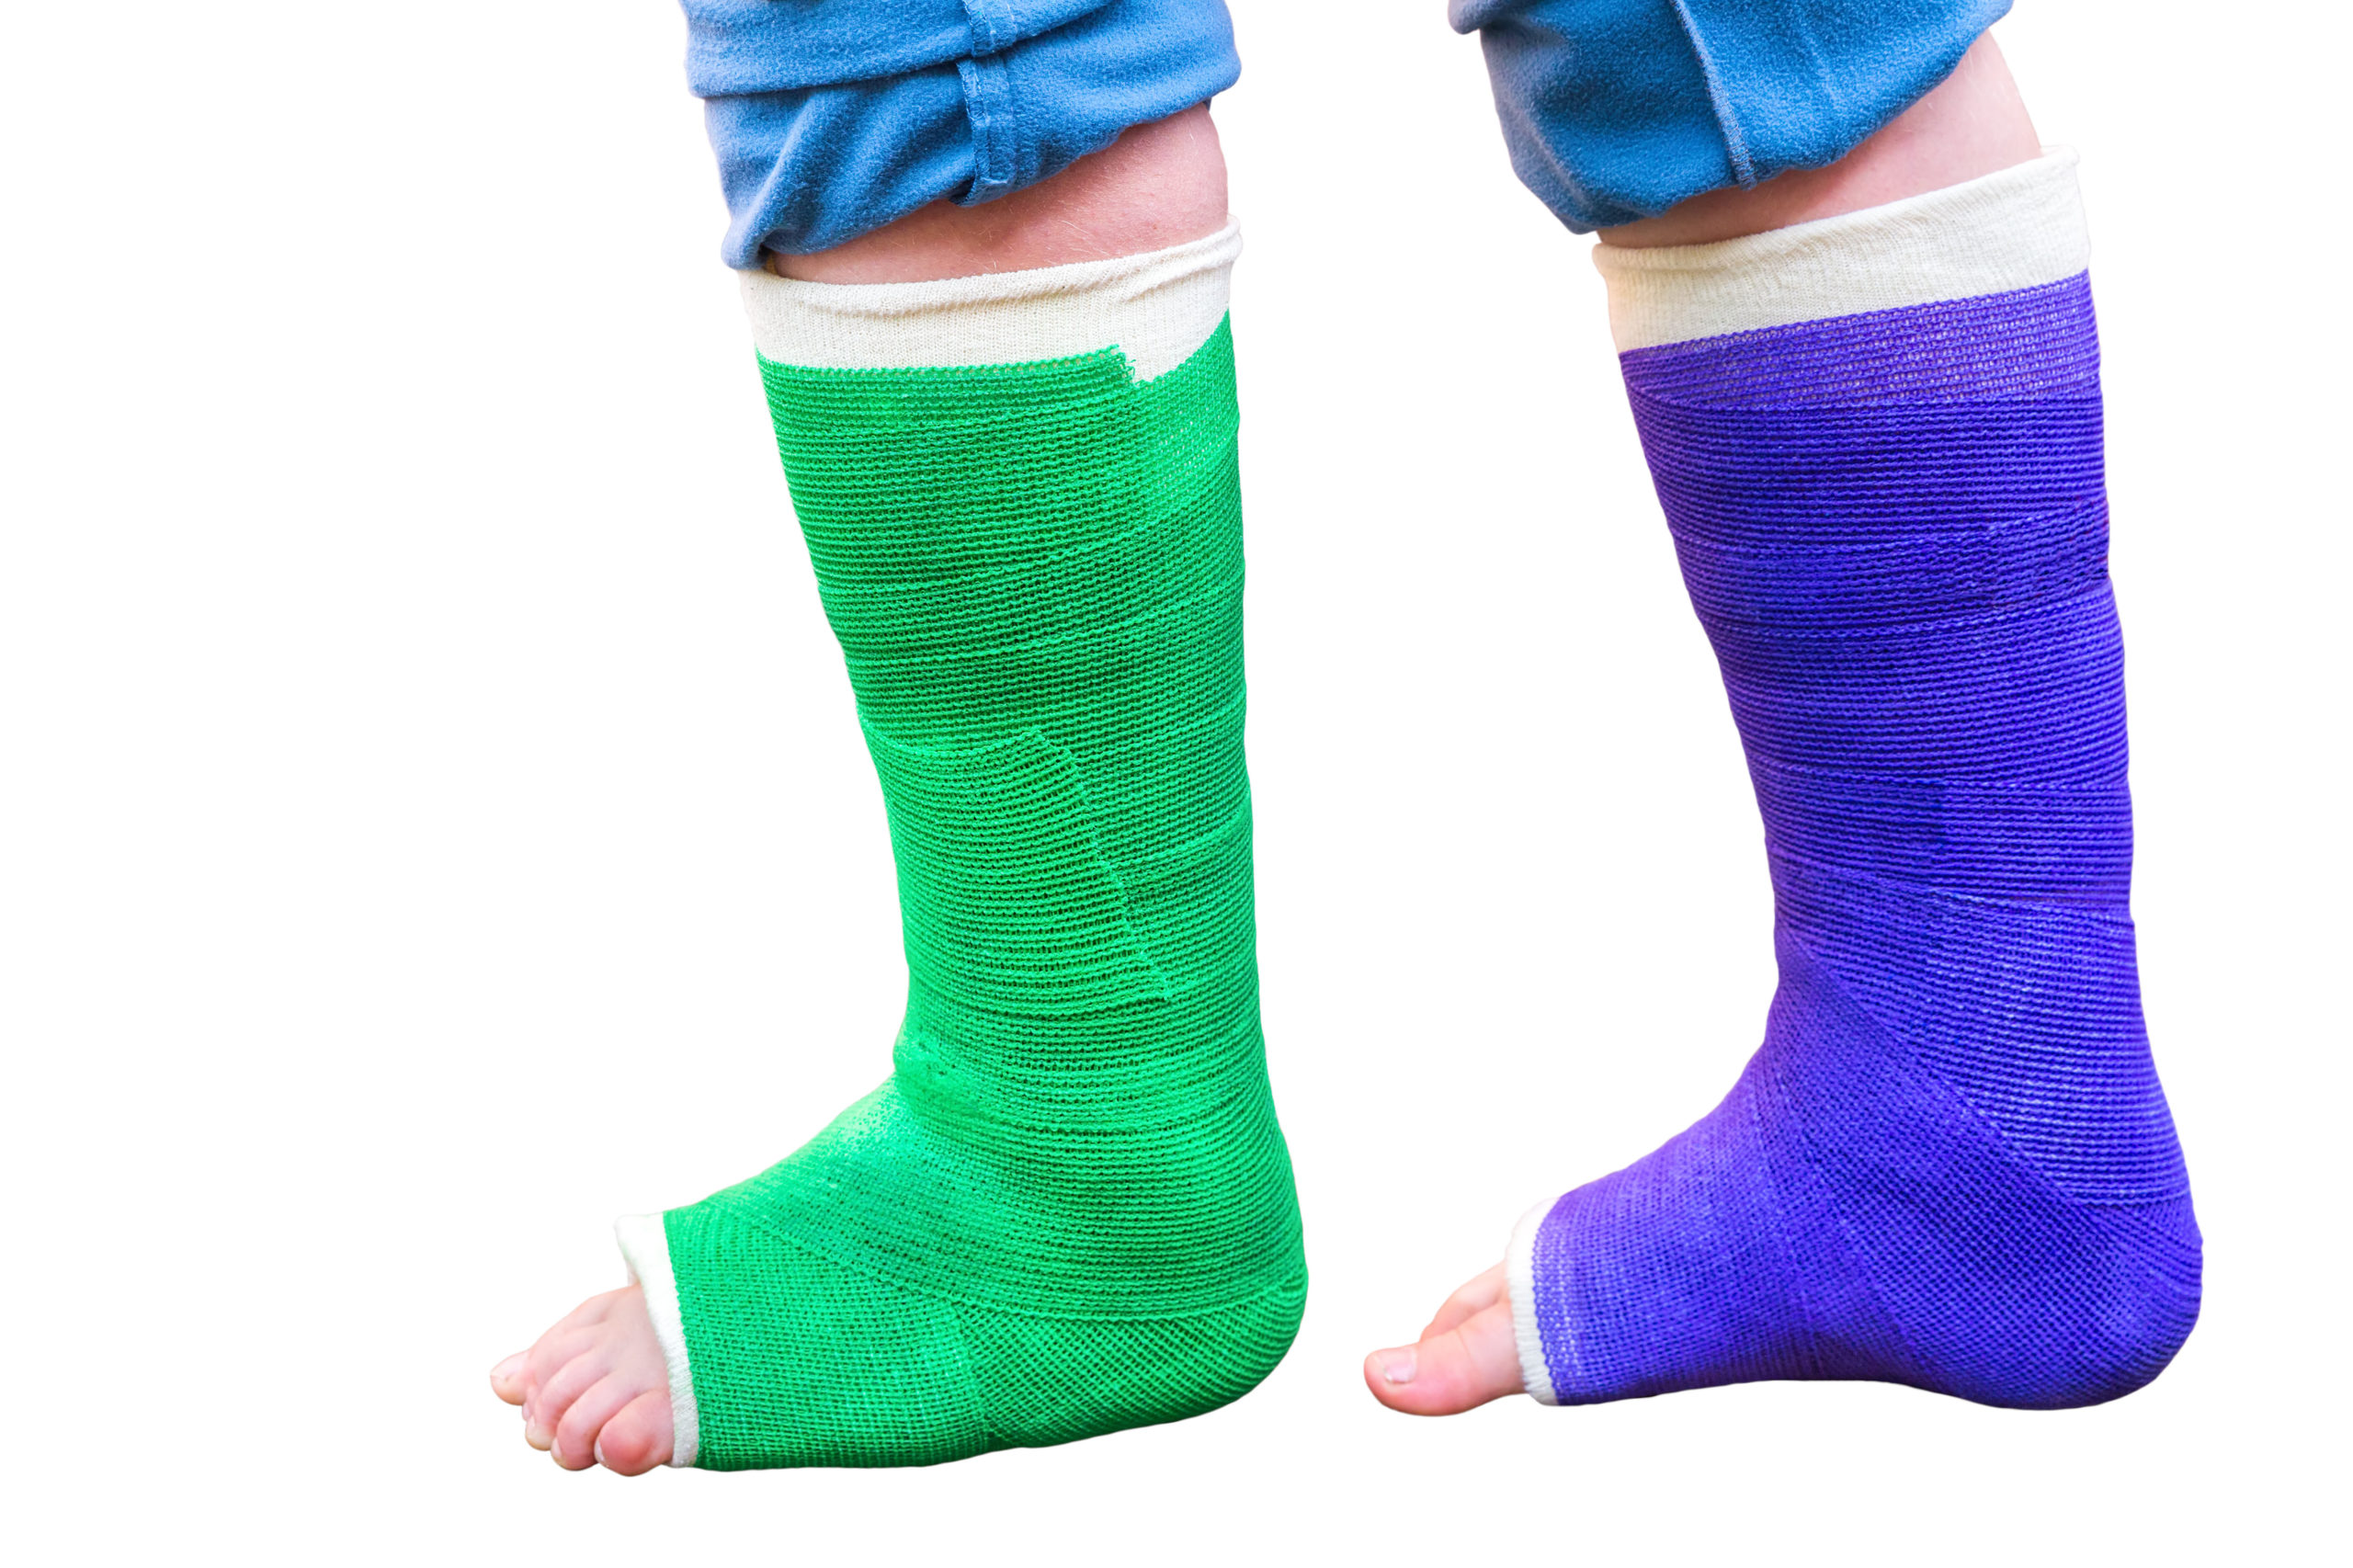 casts use in orthopaedics